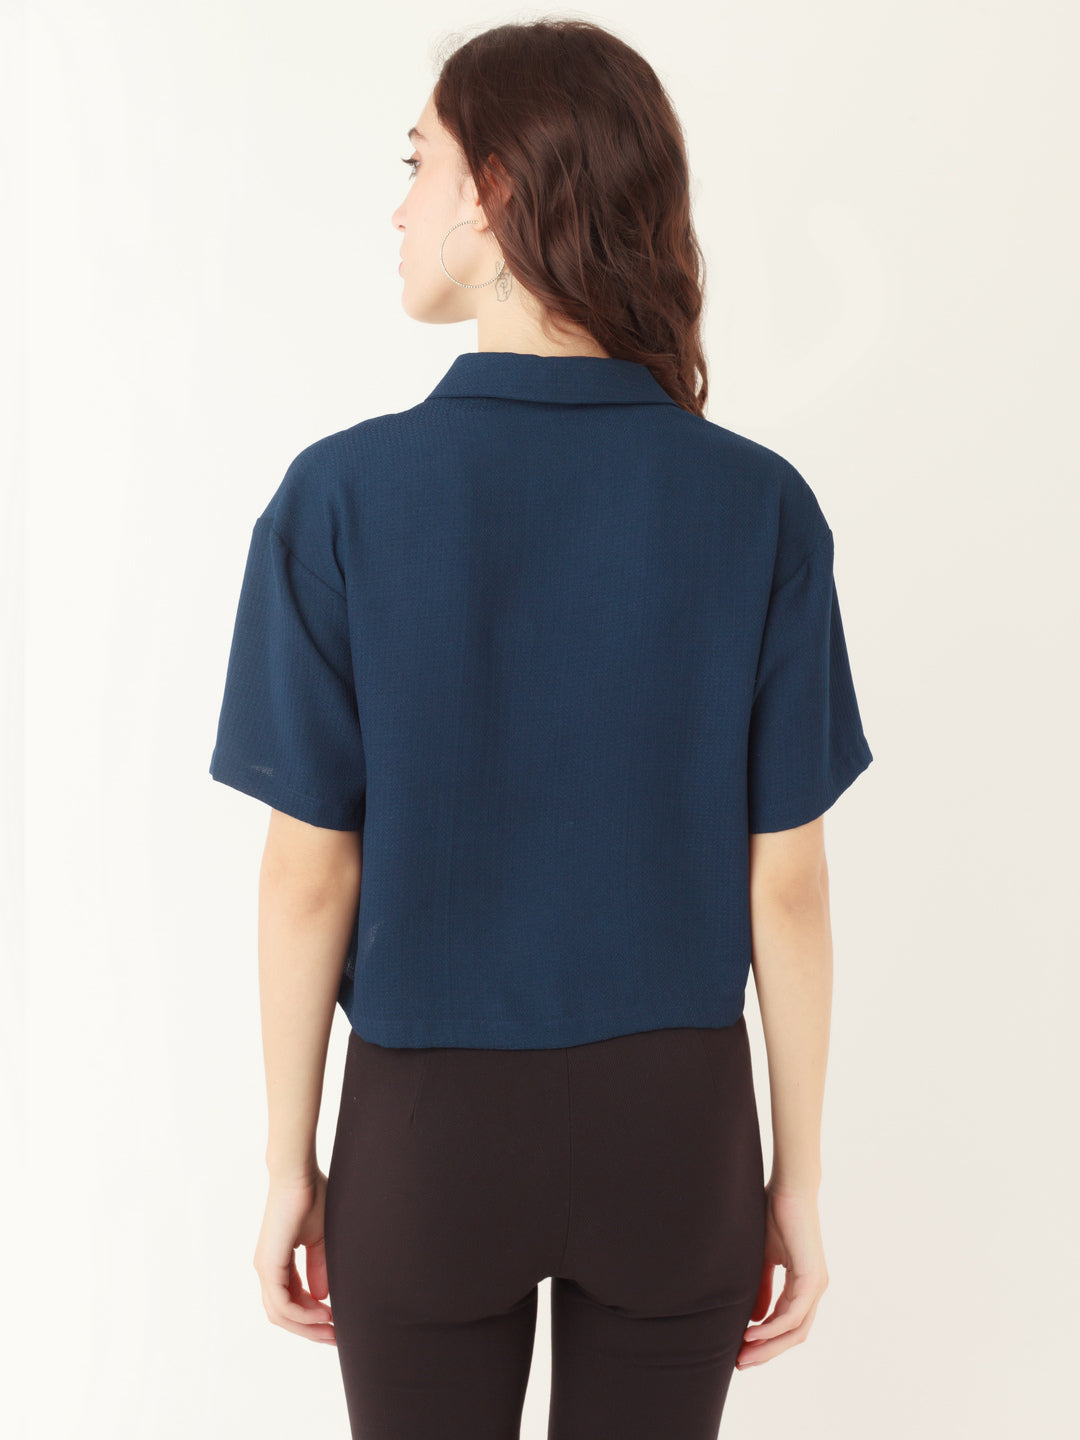 Blue Solid Cropped Top For Women